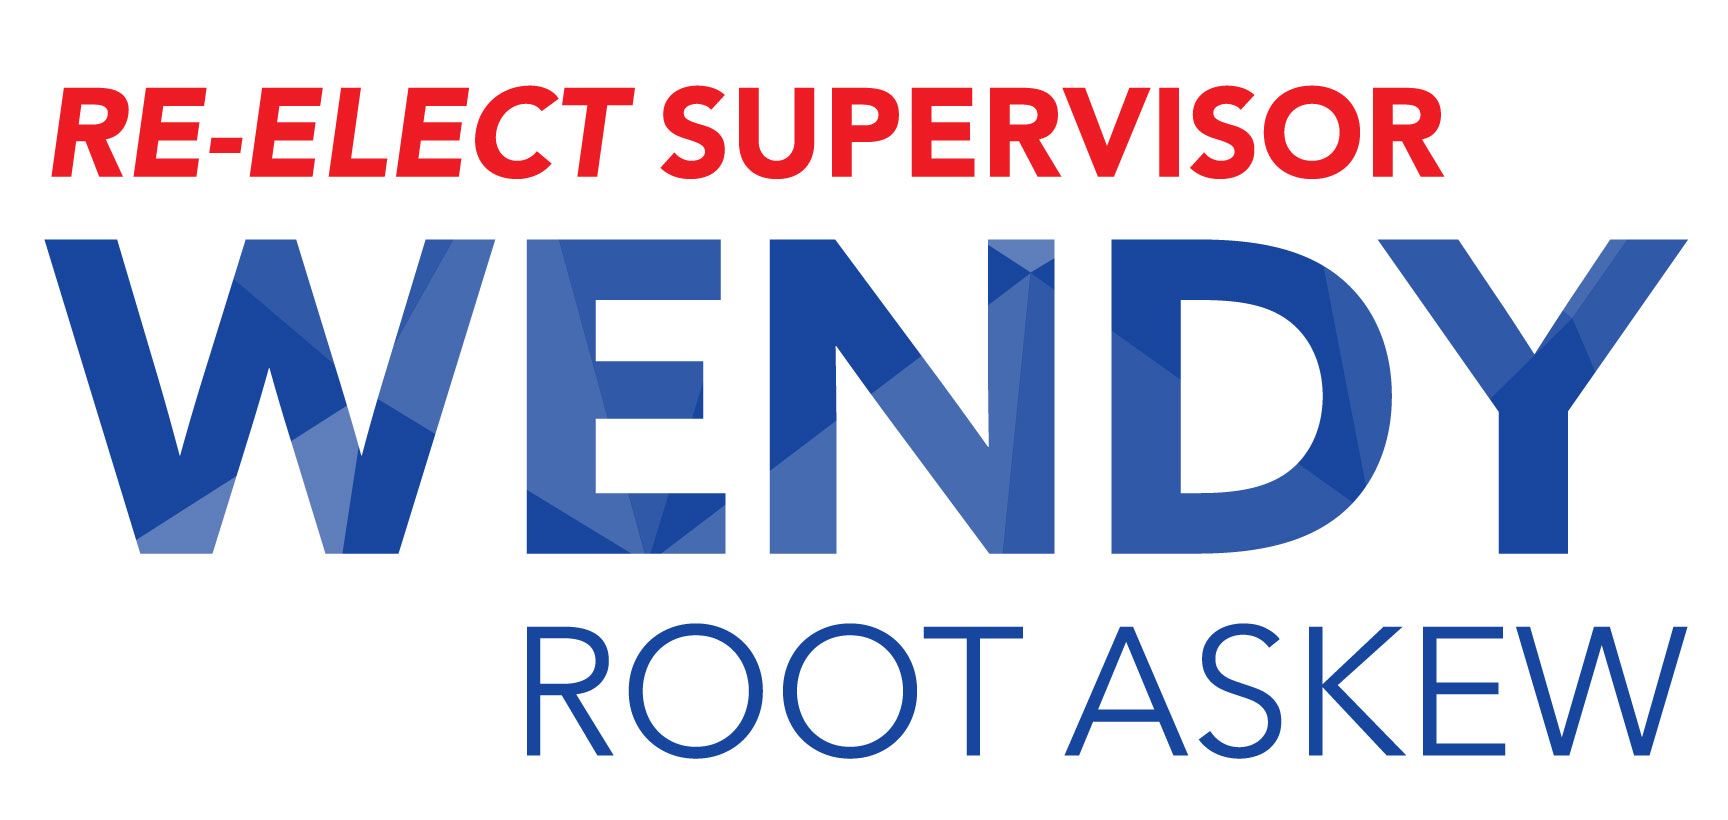 Wendy Root Askew For Monterey County Supervisor